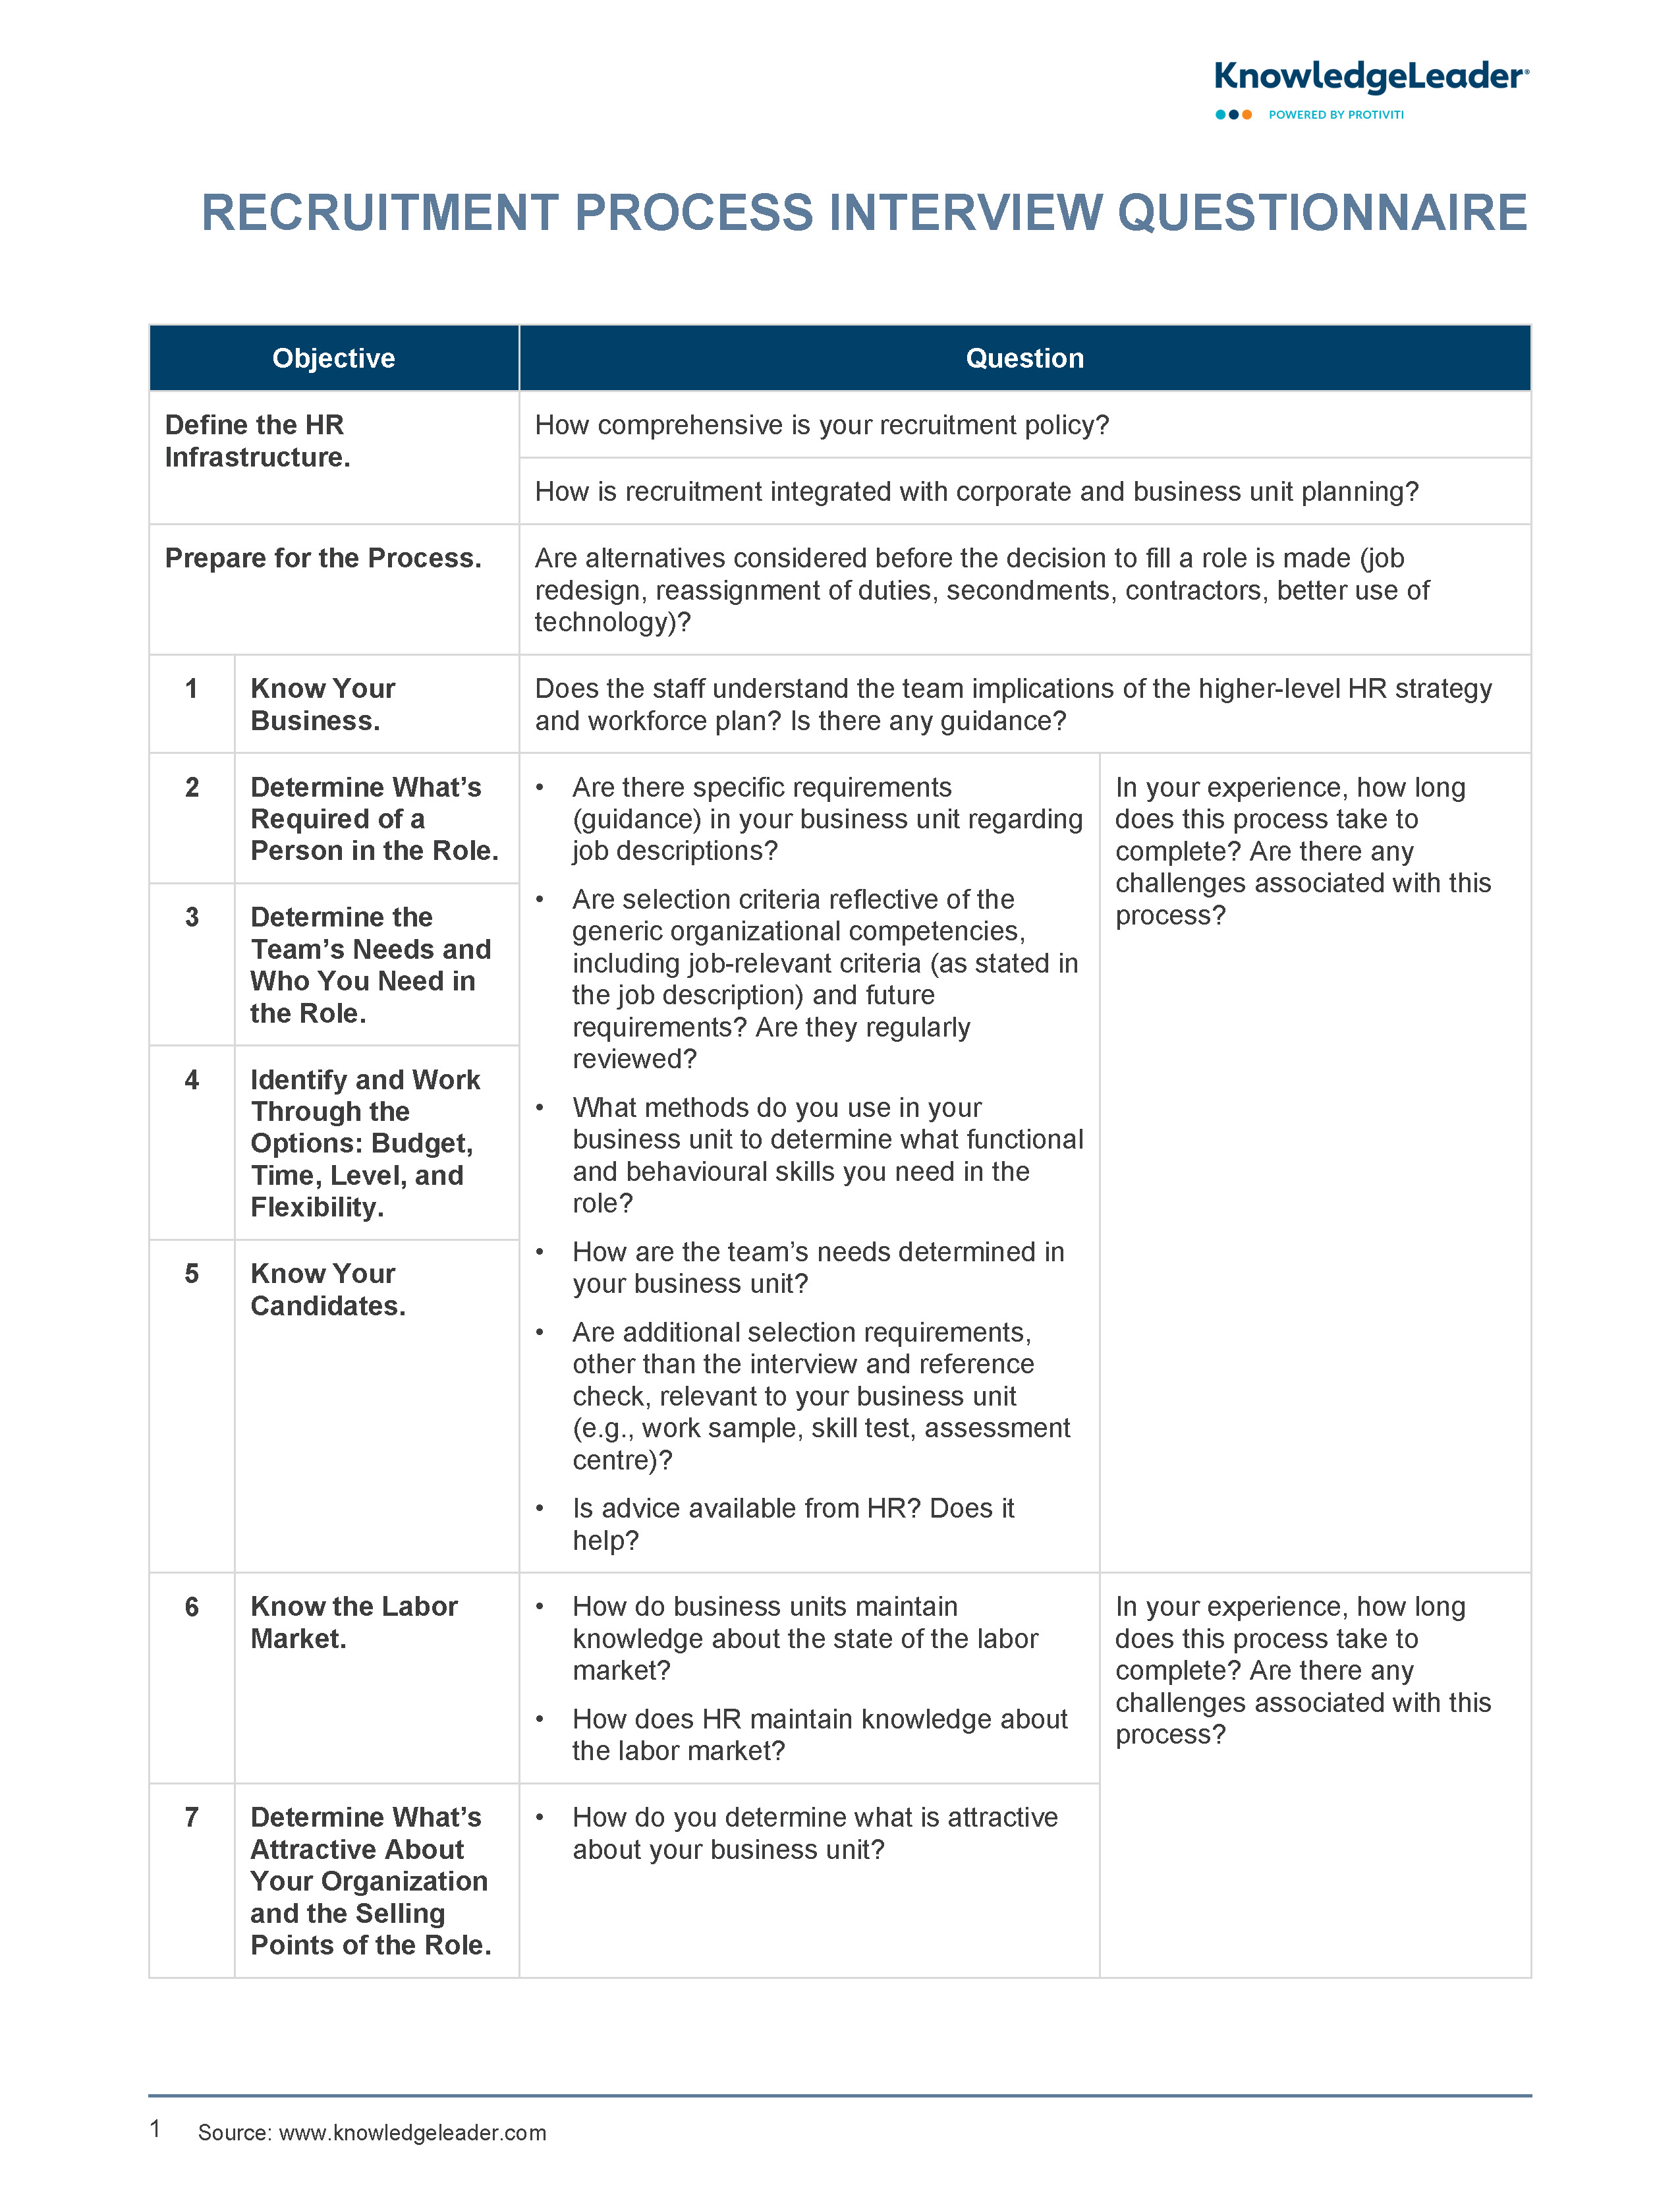 Screenshot of the first page of Recruitment Process Interview Questionnaire